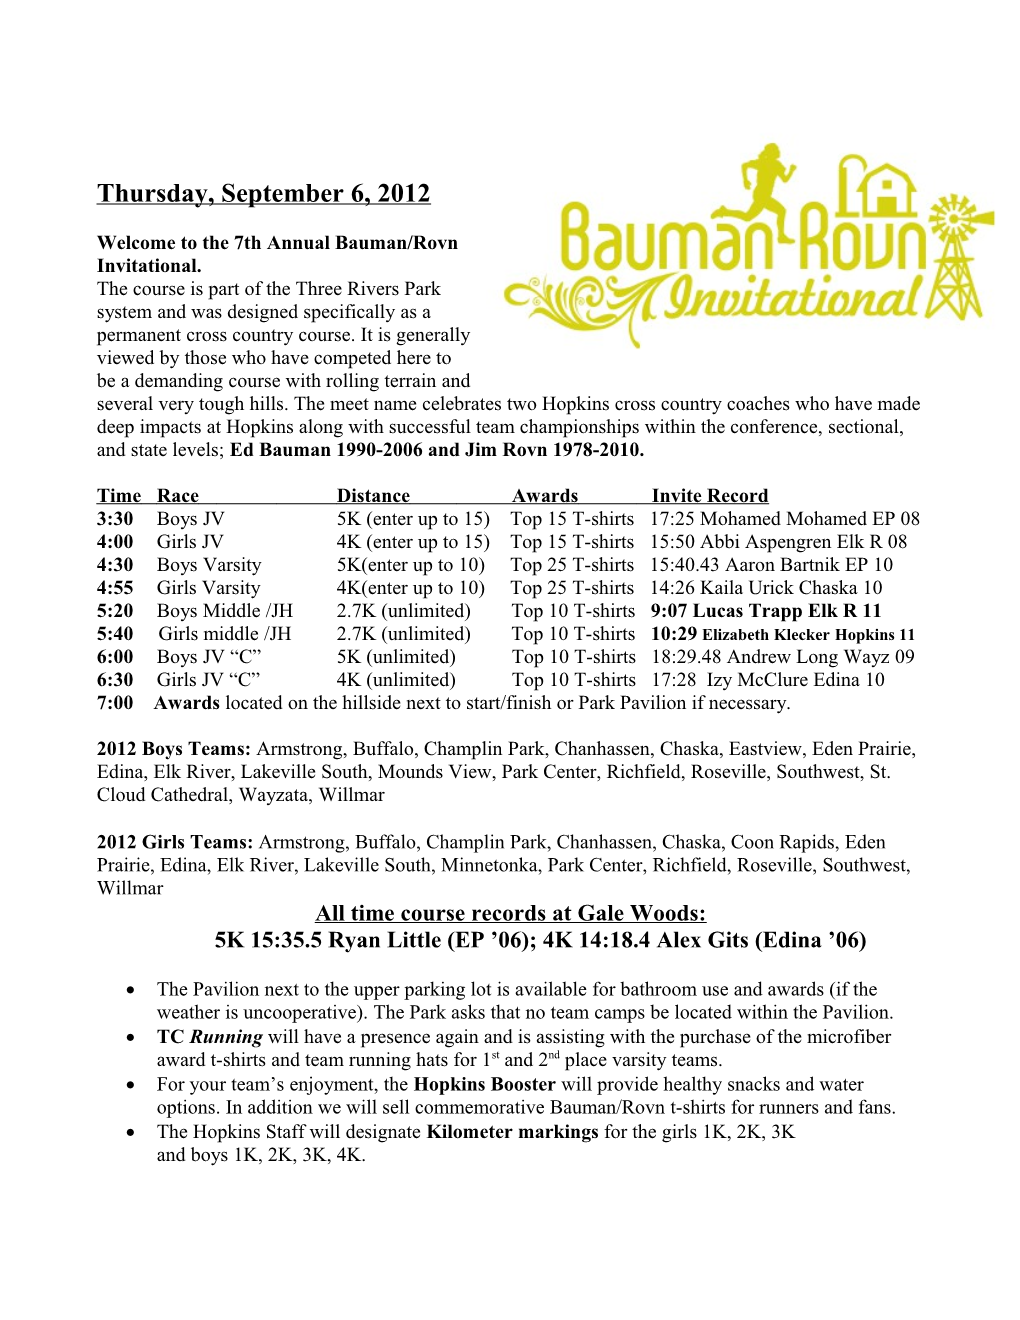 Welcome to the 7Th Annual Bauman/Rovn Invitational